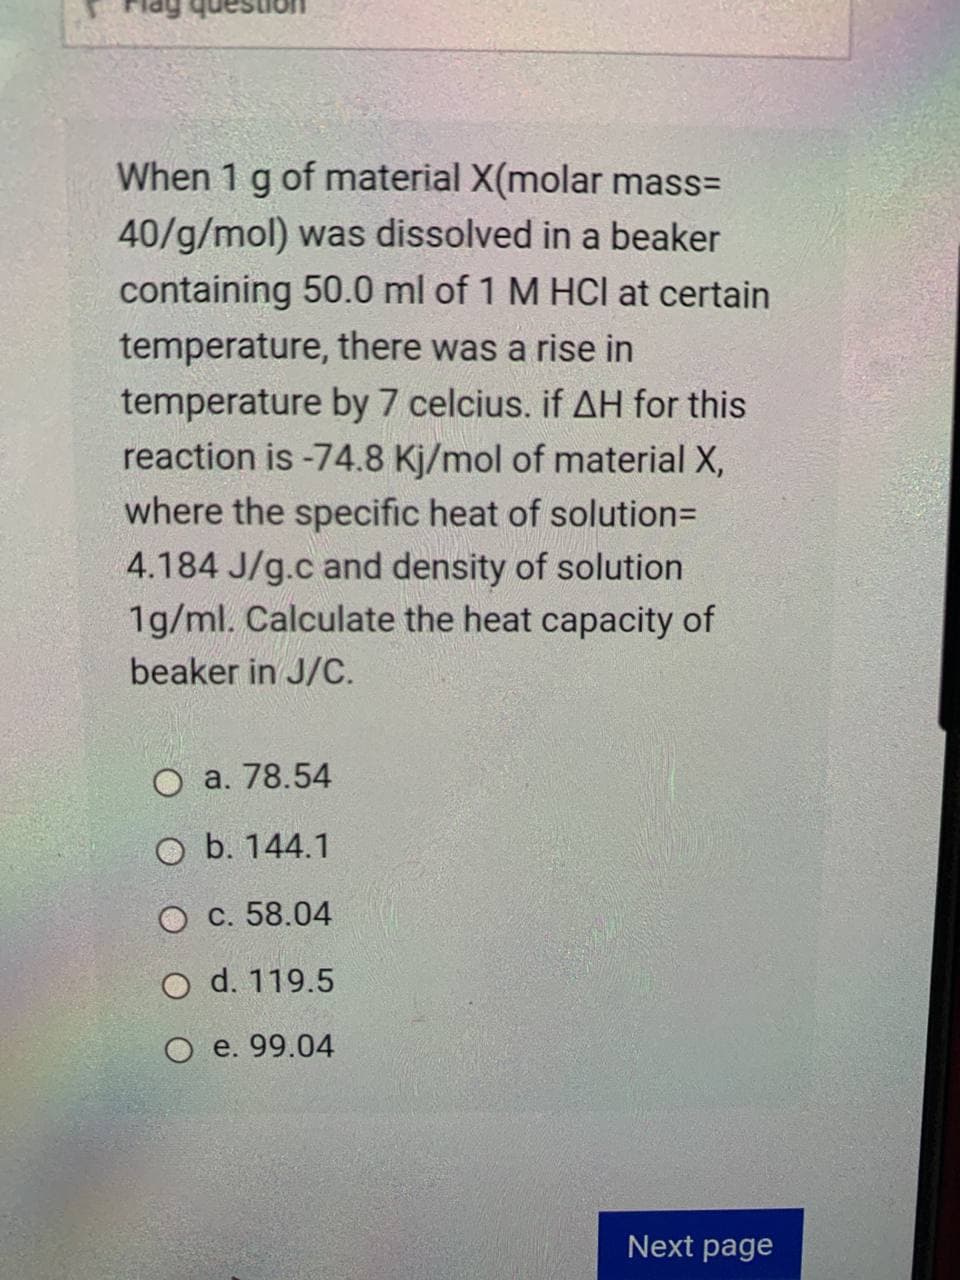 When 1 g of material X(molar mass=
40/g/mol) was dissolved in a beaker
containing 50.0 ml of 1 M HCl at certain
temperature, there was a rise in
temperature by 7 celcius. if AH for this
reaction is -74.8 Kj/mol of material X,
where the specific heat of solution=
4.184 J/g.c and density of solution
1g/ml. Calculate the heat capacity of
beaker in J/C.
O a. 78.54
O b. 144.1
O c. 58.04
O d. 119.5
O e. 99.04
Next page
